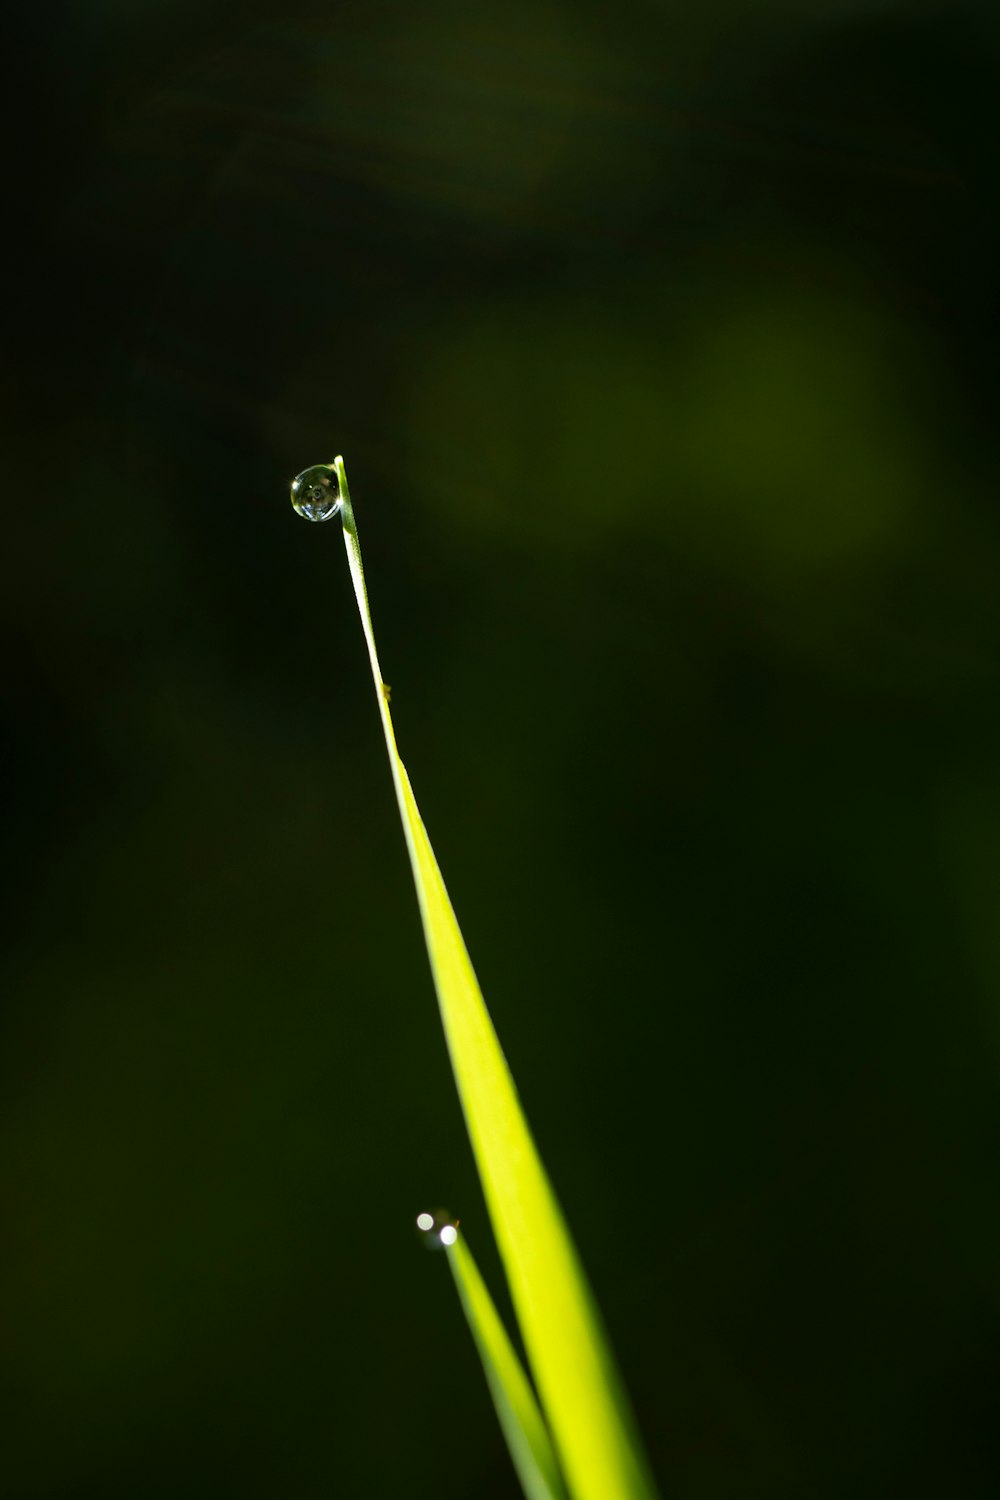 a drop of water on a blade of grass